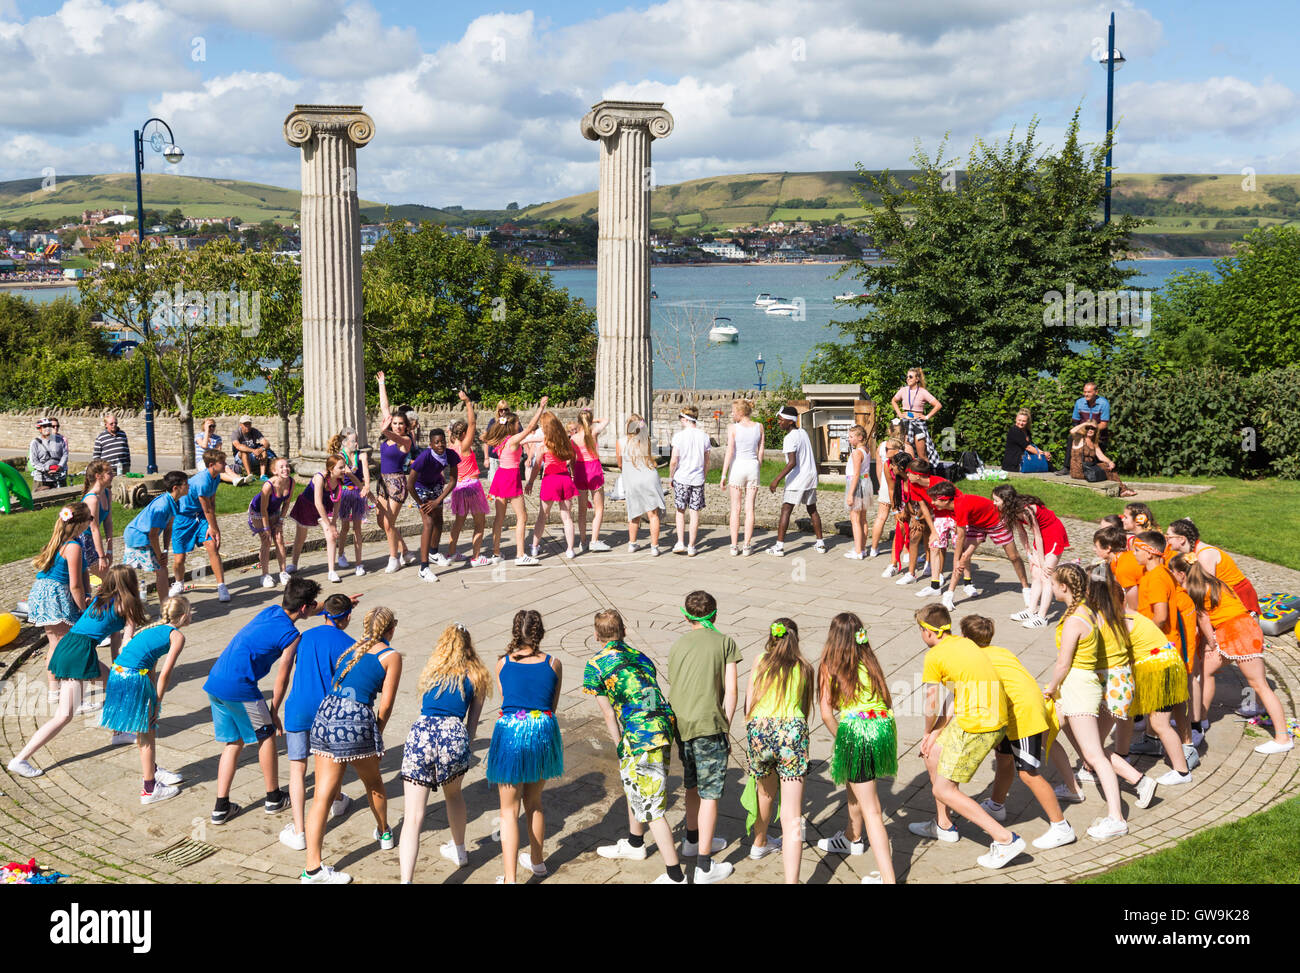 Youths of Horizon Community College dance as part of Swanage Folk Festival at Prince Albert Gardens, Swanage, Dorset UK in September Stock Photo